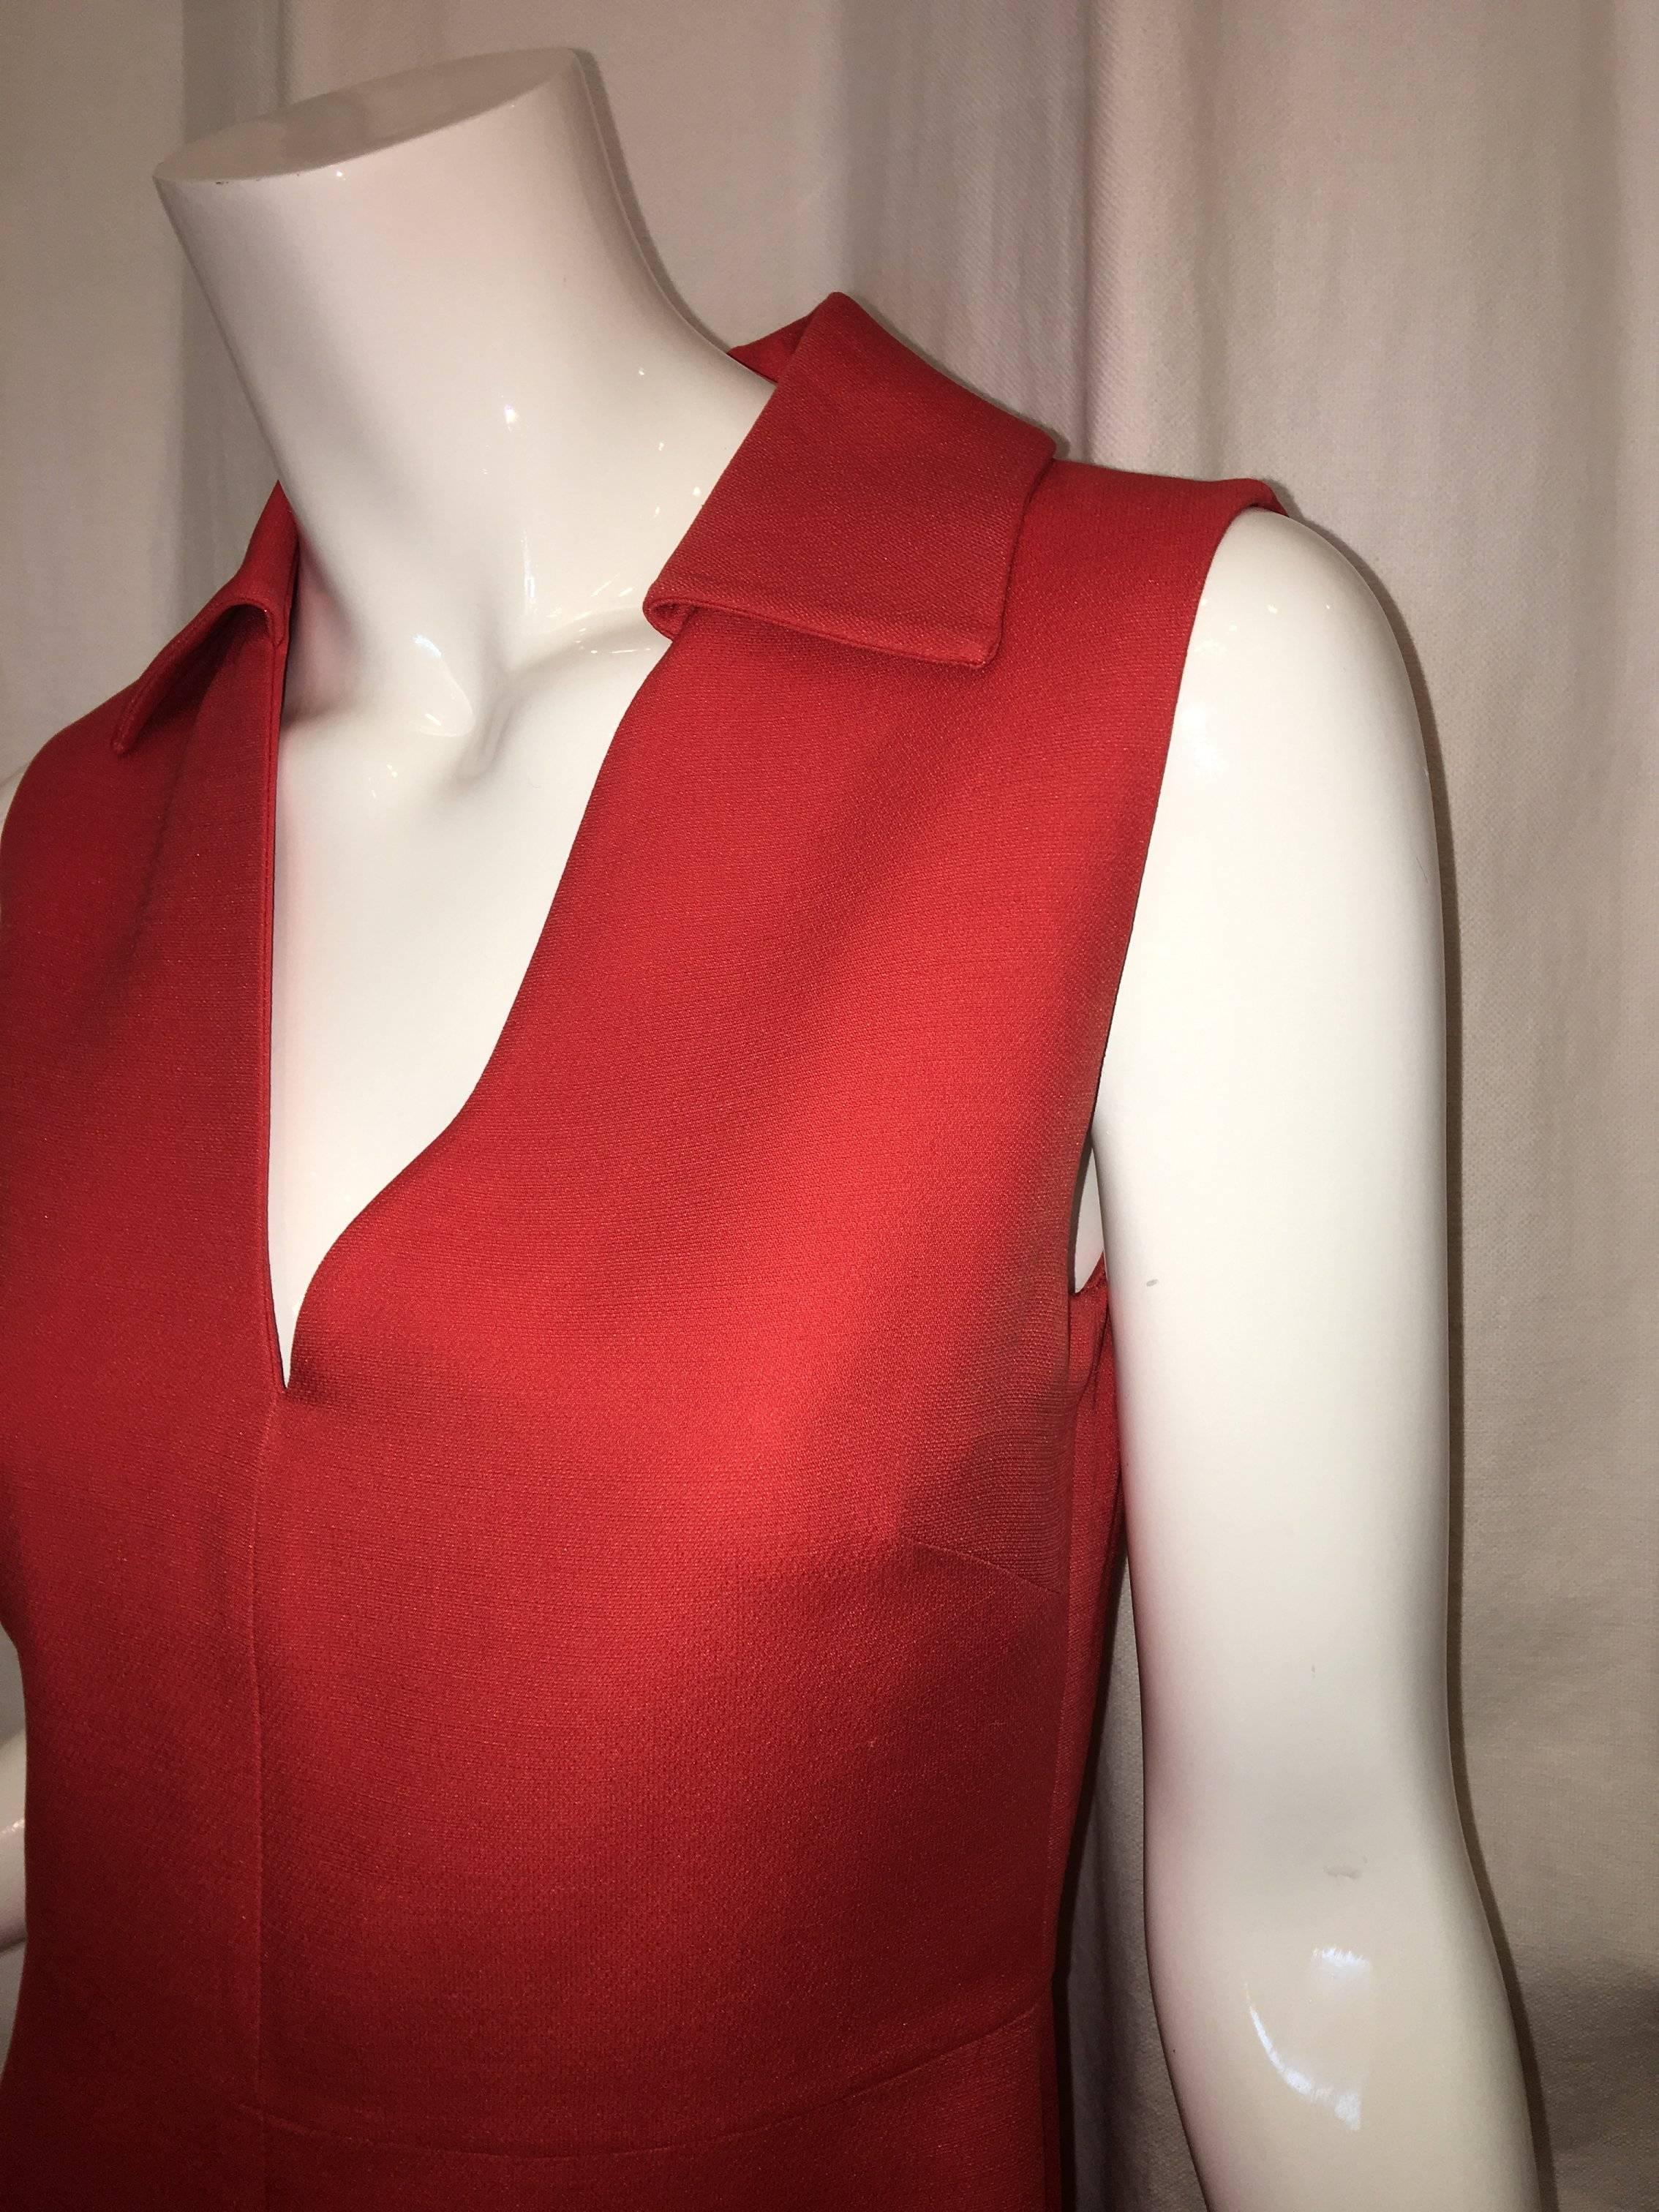 Valentino Wool Dress in Coral with Collar and V-Neck. Sleeveless.